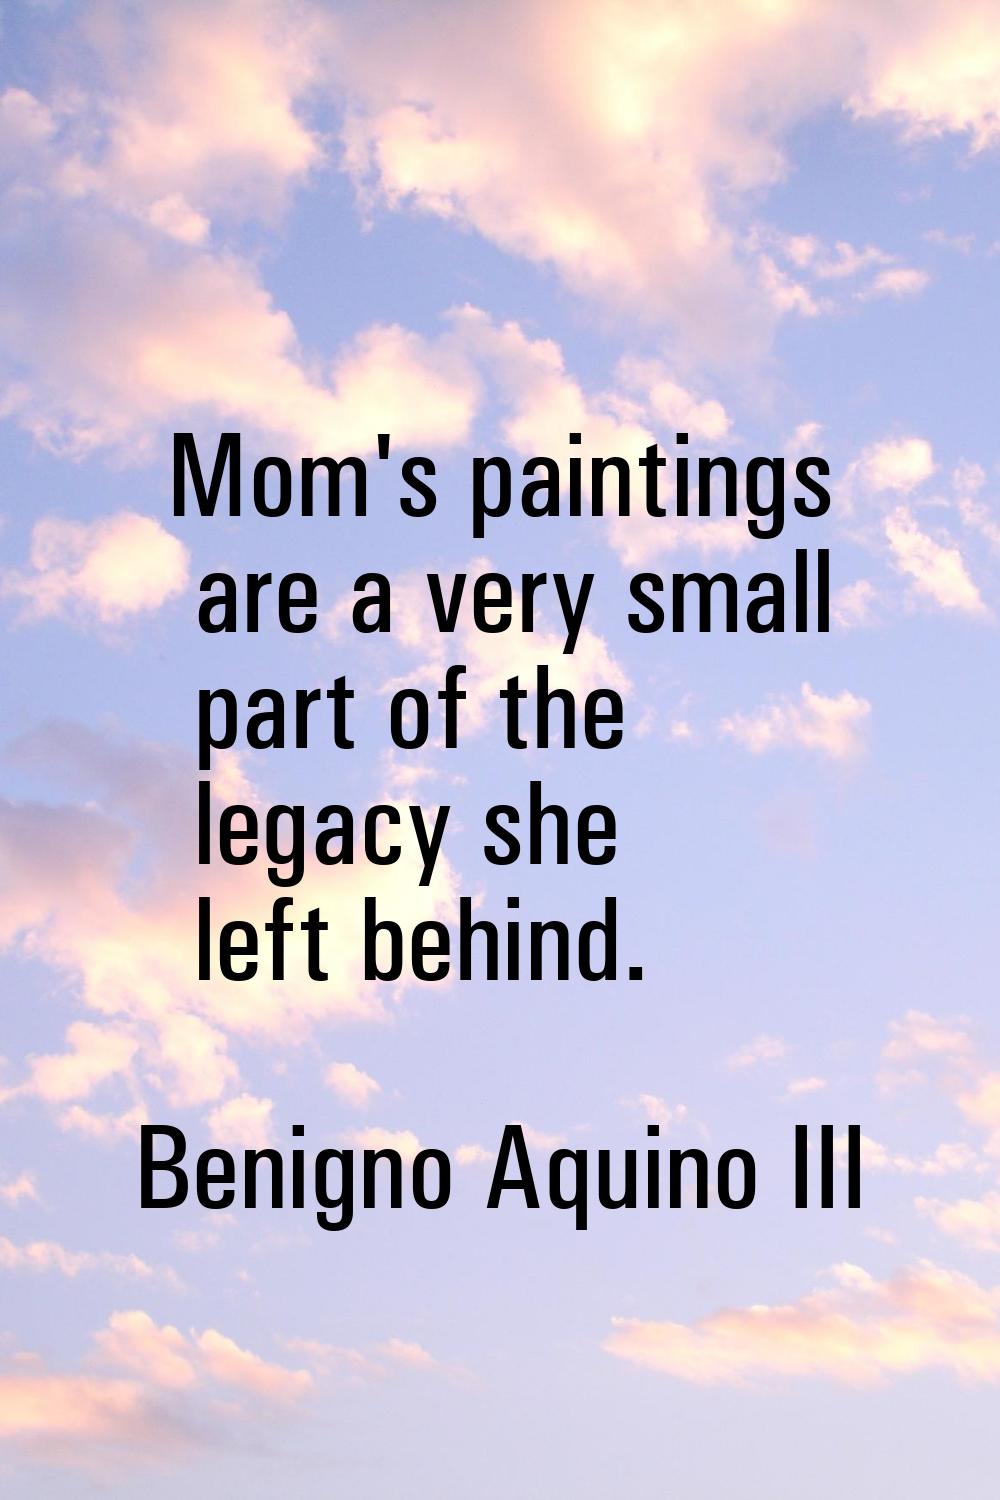 Mom's paintings are a very small part of the legacy she left behind.